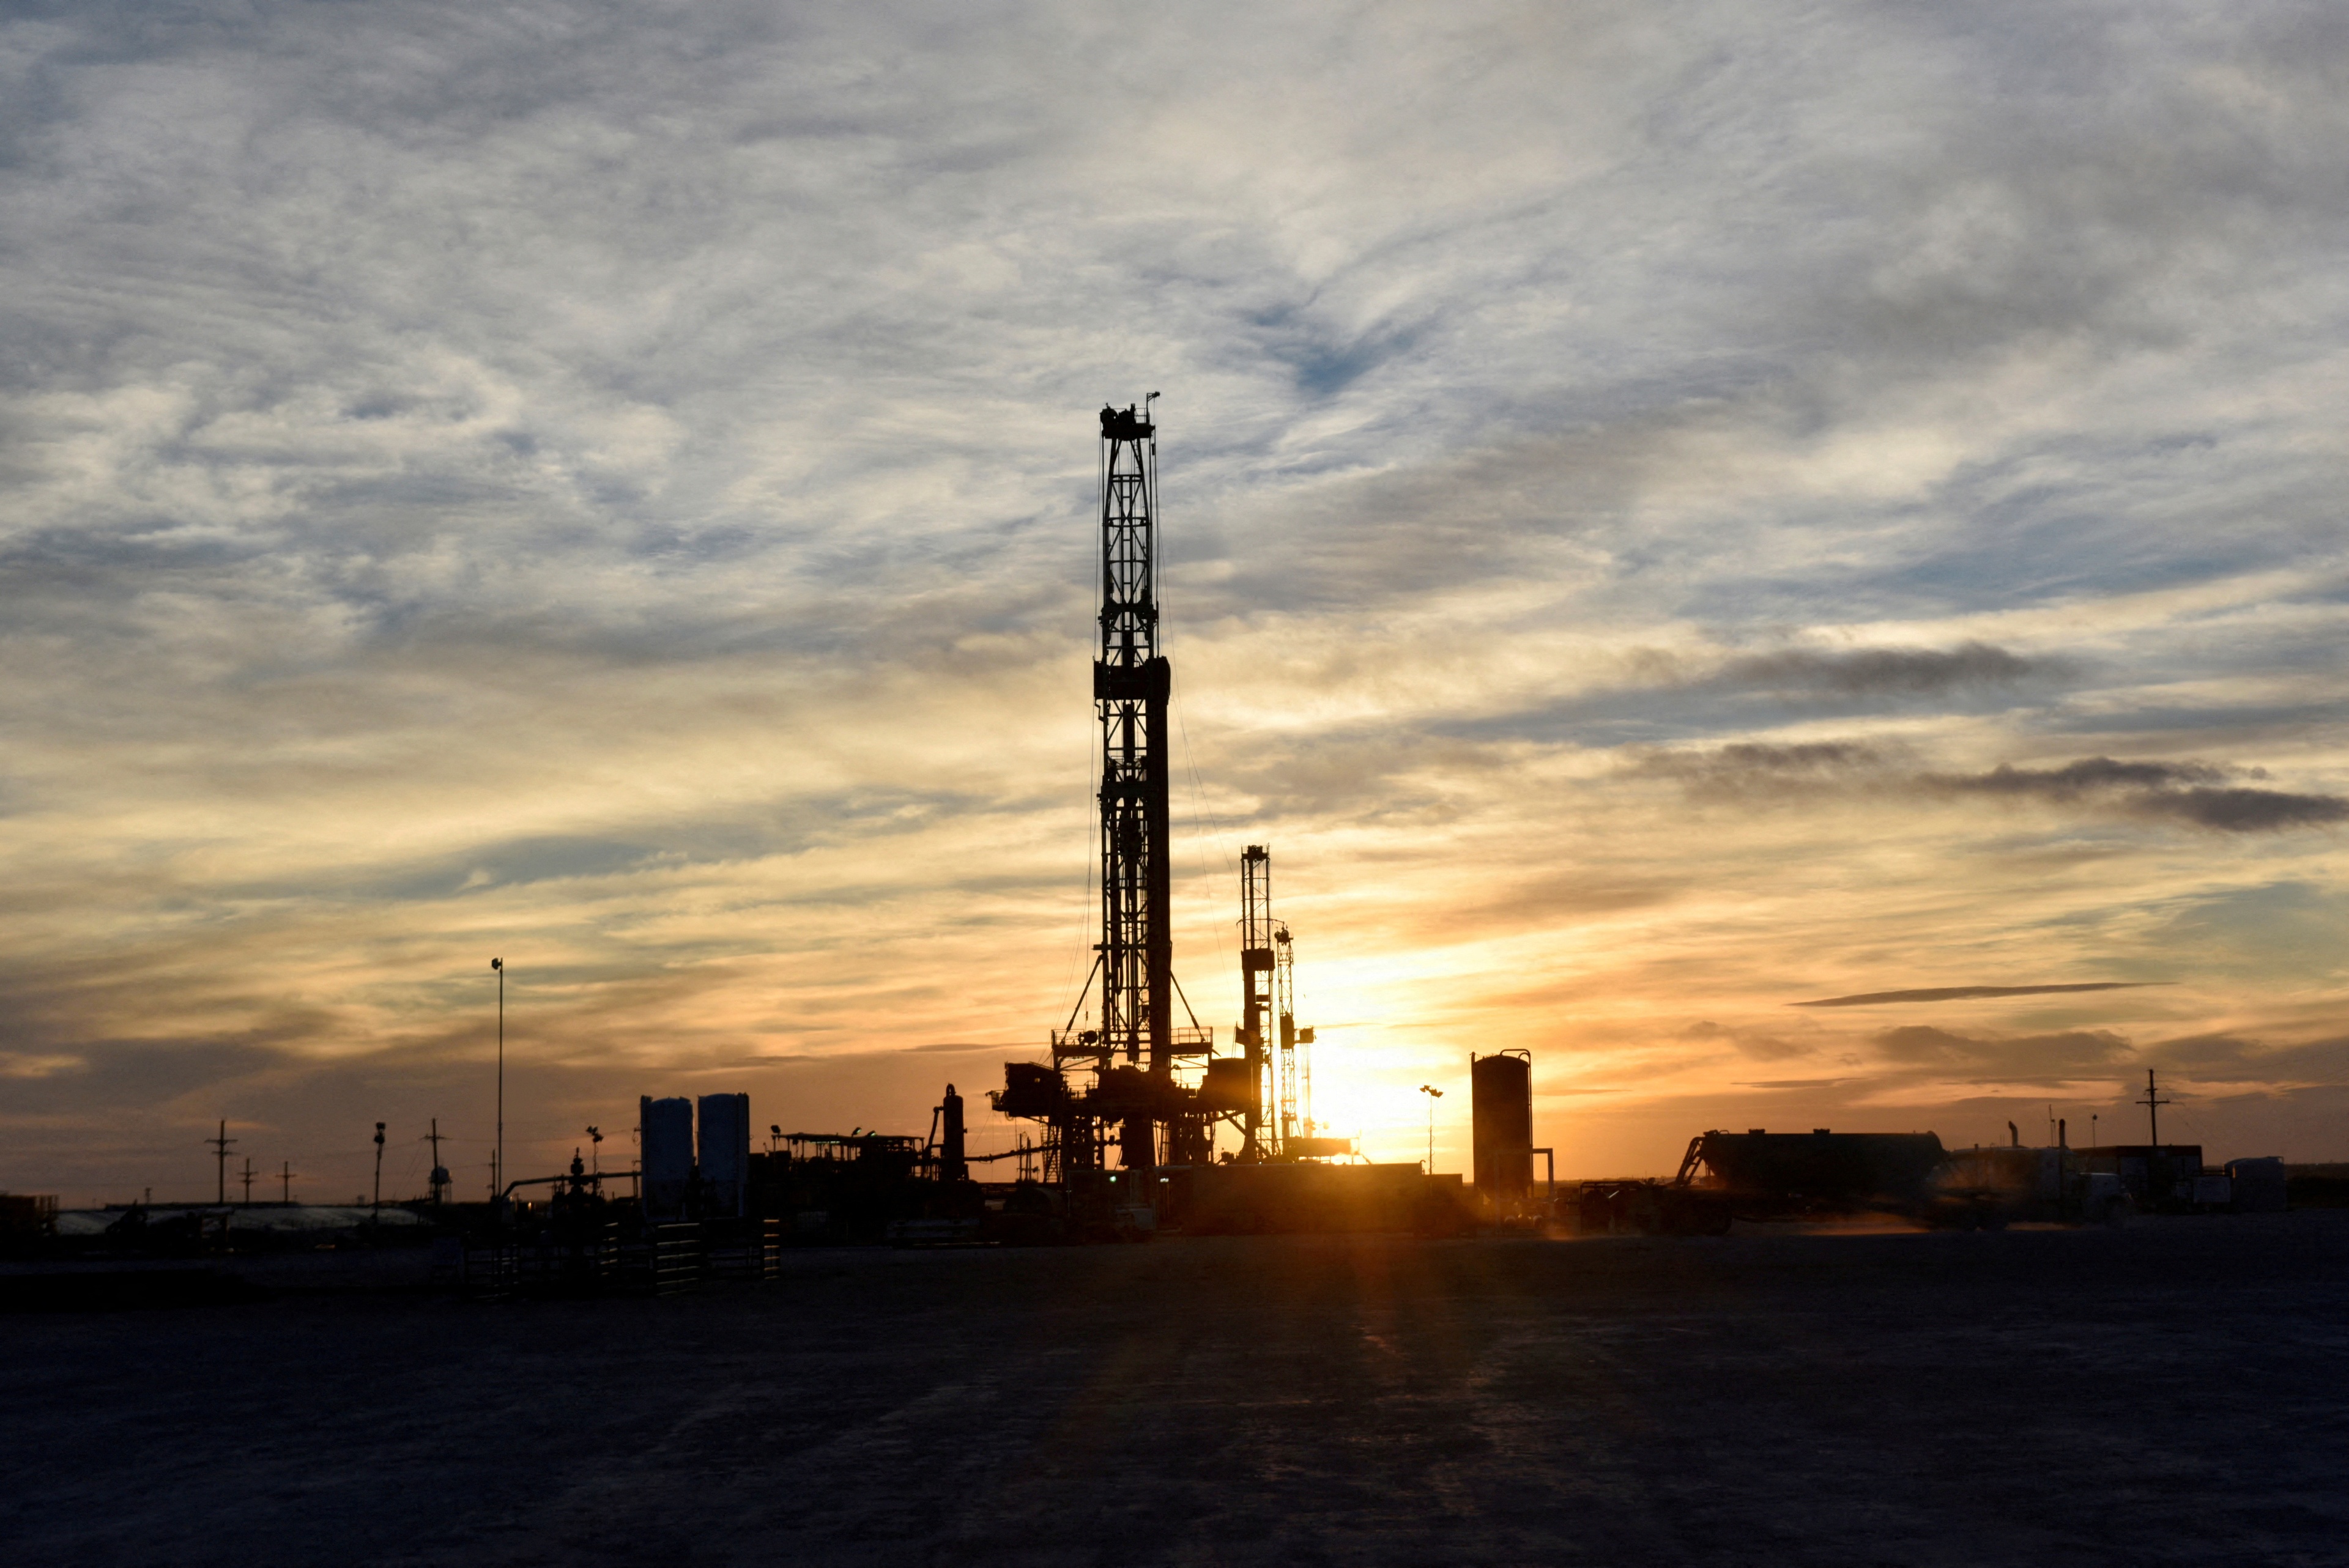 FILE PHOTO: Drilling rigs operate at sunset in Midland, Texas, U.S., February 13, 2019. Picture taken February 13, 2019. REUTERS/Nick Oxford/File Photo